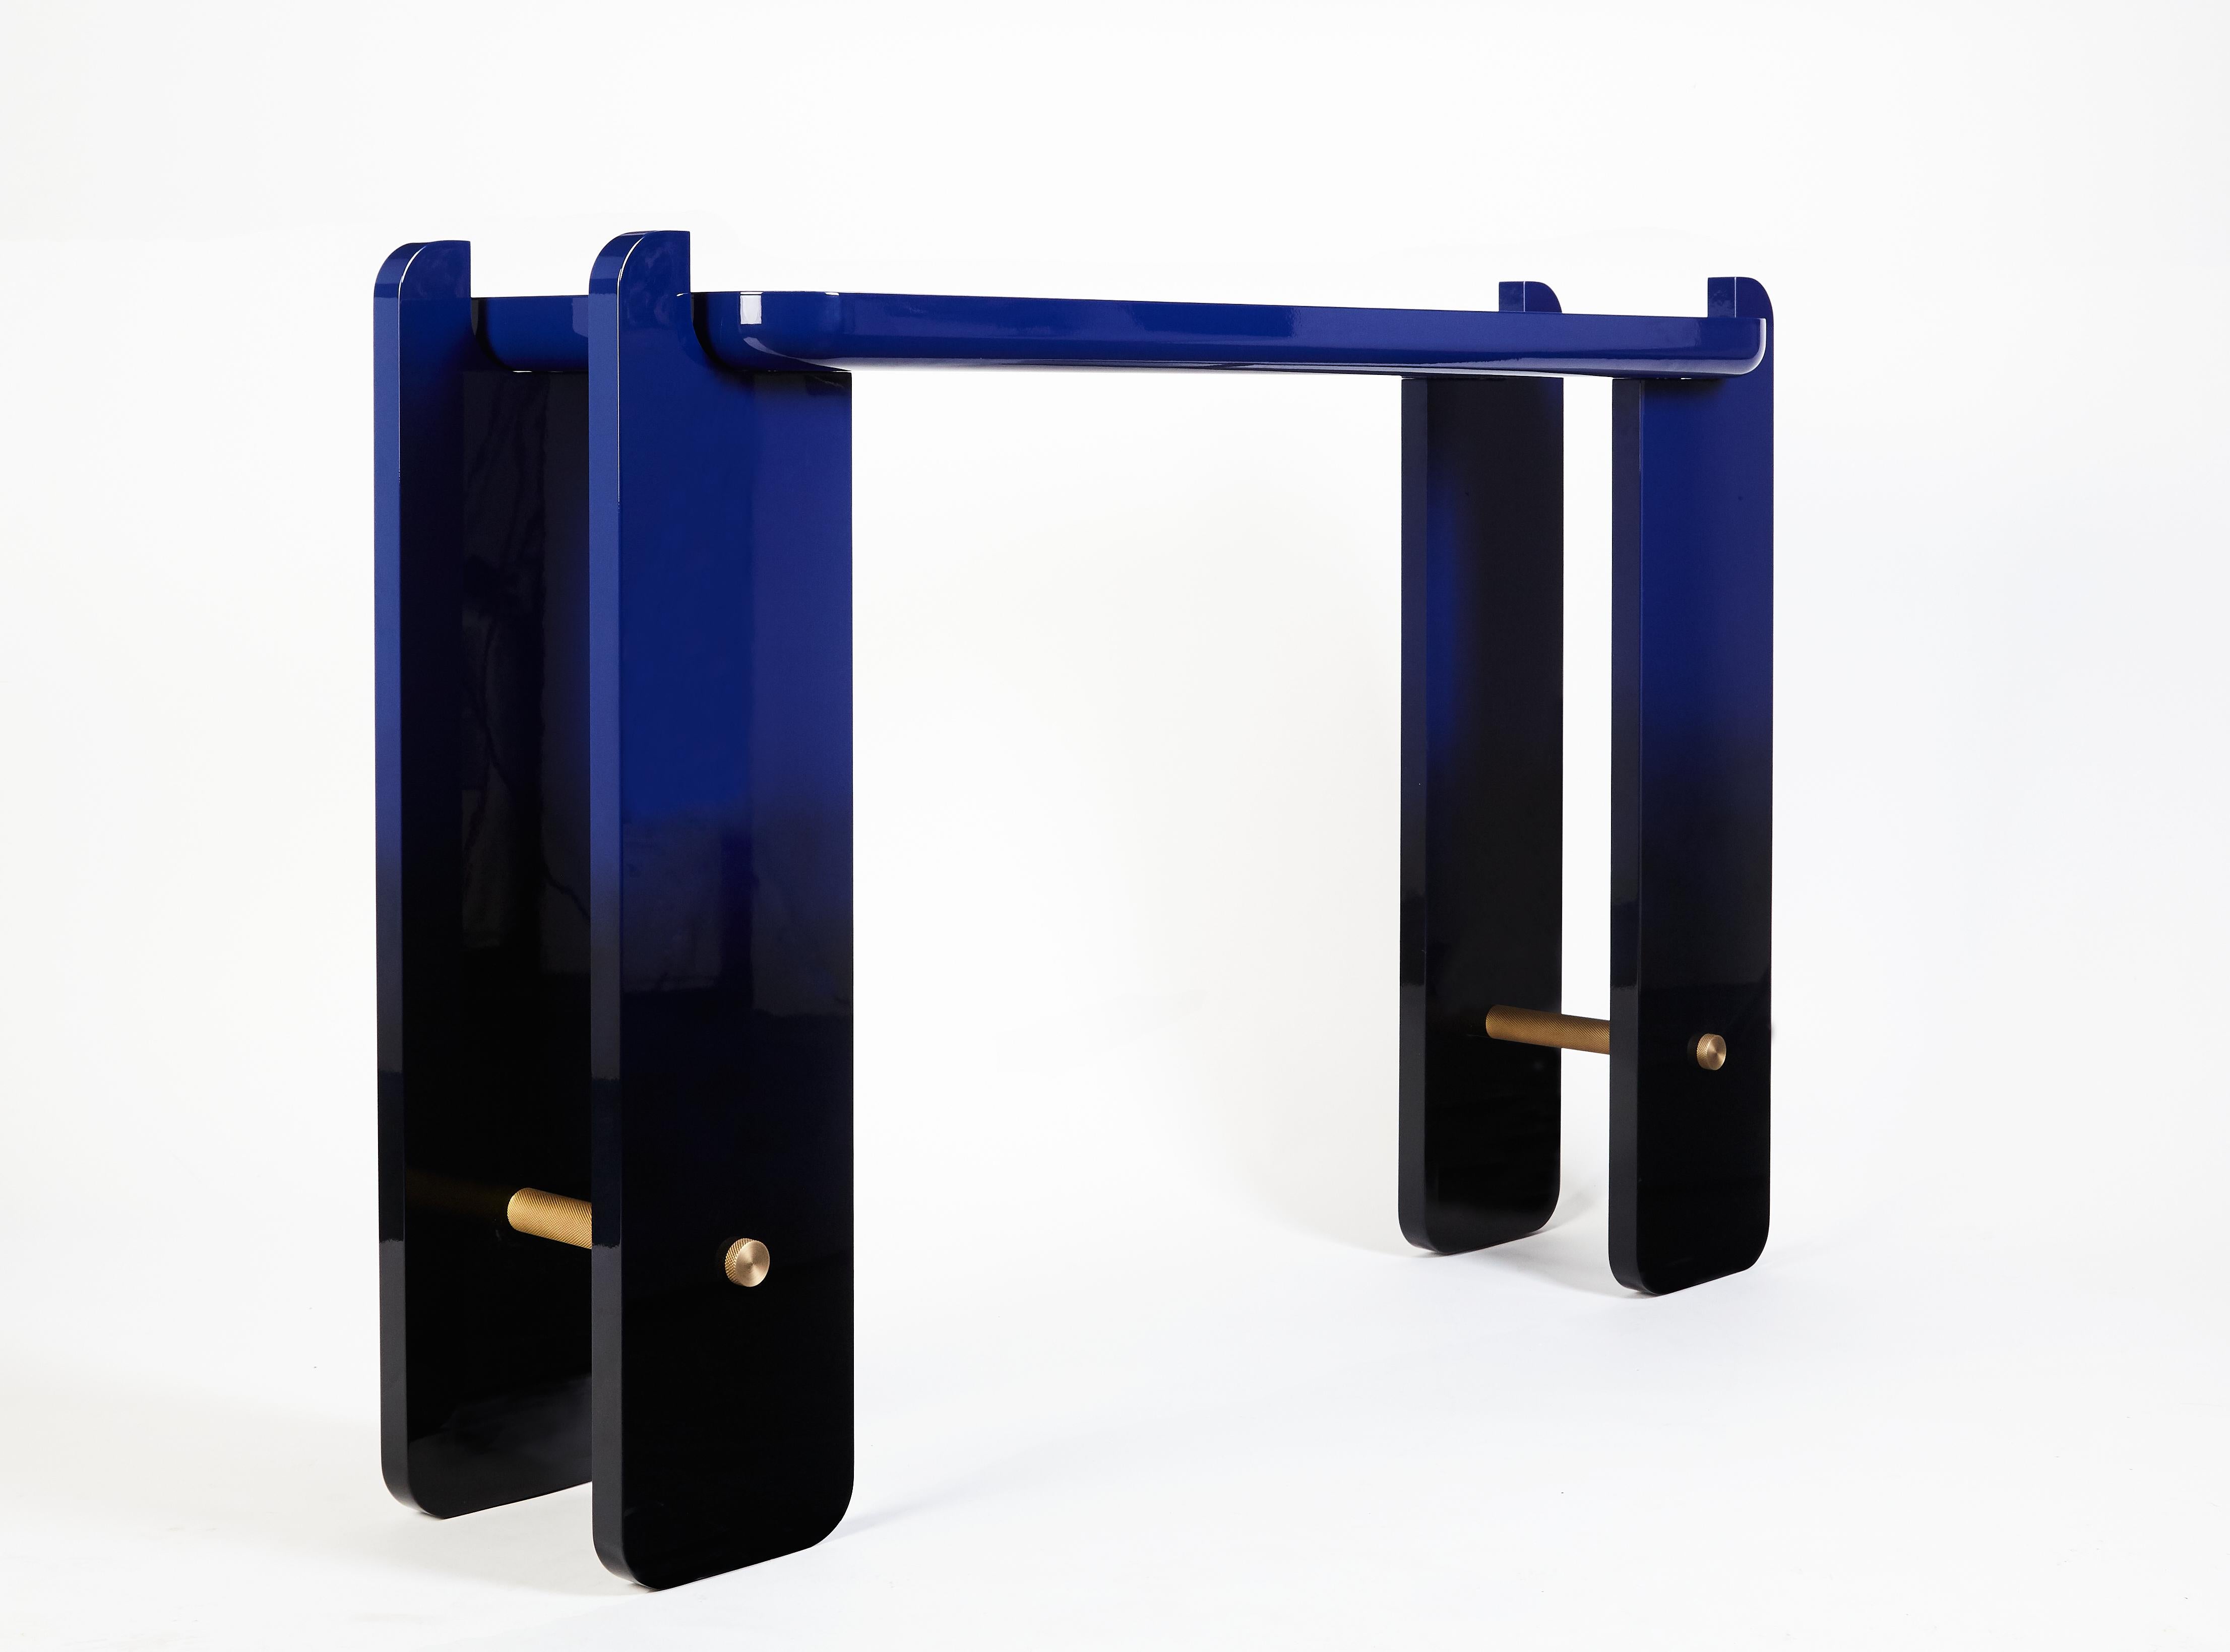 Ipanema Console Table, Ombre Effect with Brass Details, Handcrafted by Duistt

The rounded geometric shapes of the Ipanema series refer to the imagination of the well-known sidewalk in Rio de Janeiro. We wanted to invest in fresh finishes, and